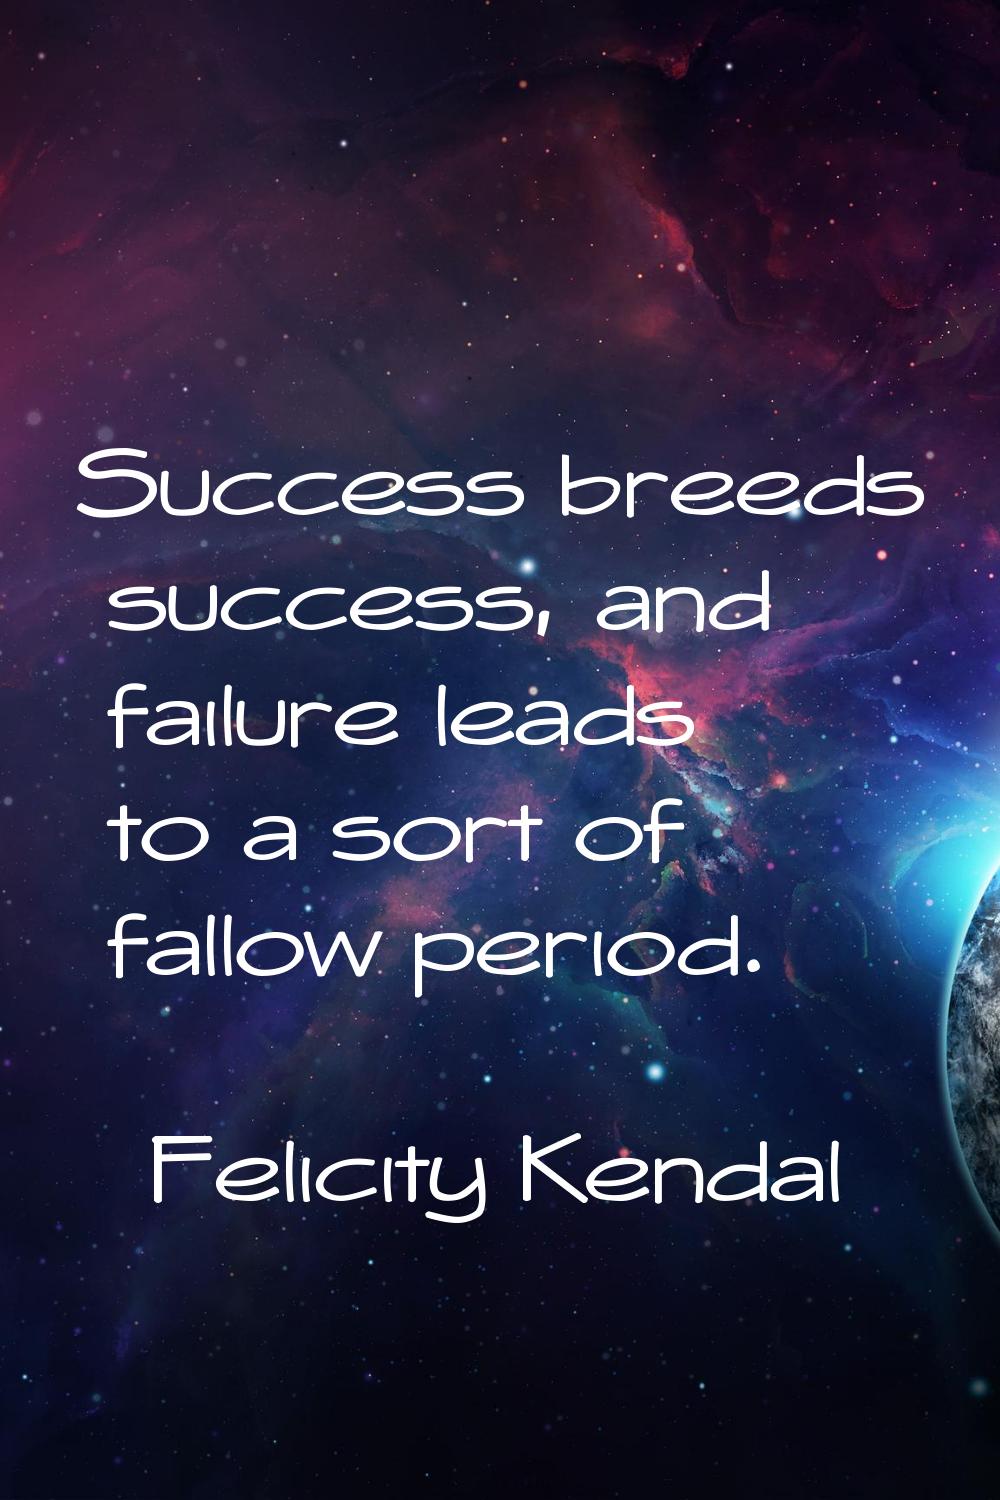 Success breeds success, and failure leads to a sort of fallow period.